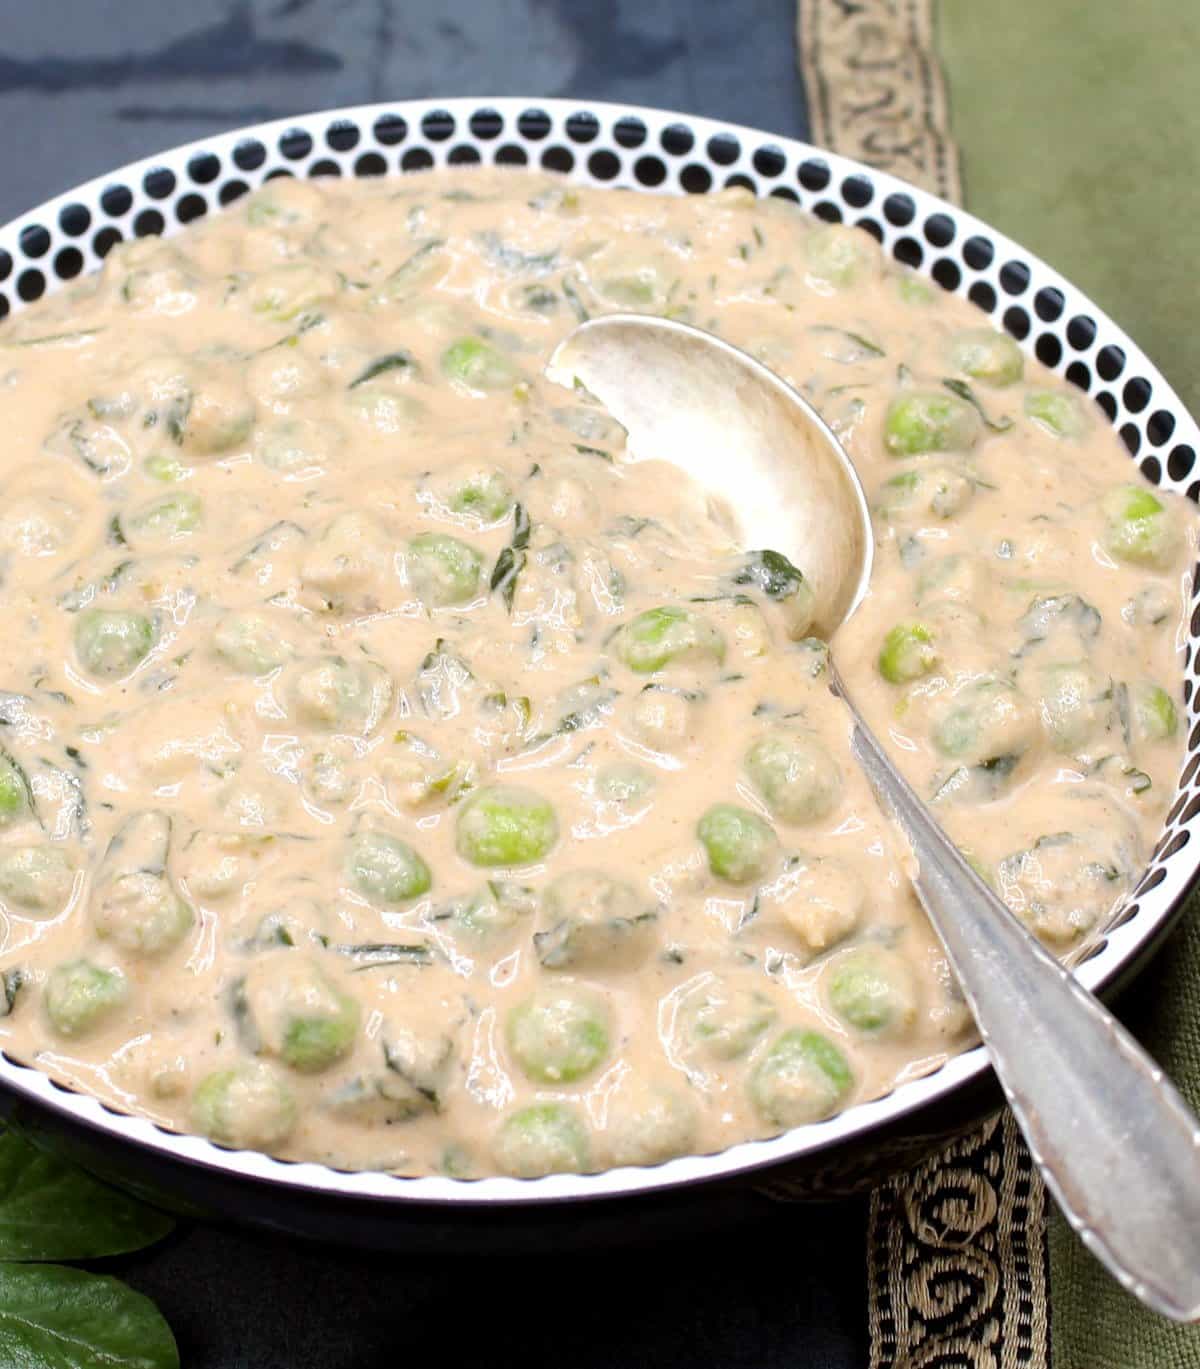 Methi matar malai in white and black bowl with silver spoon.